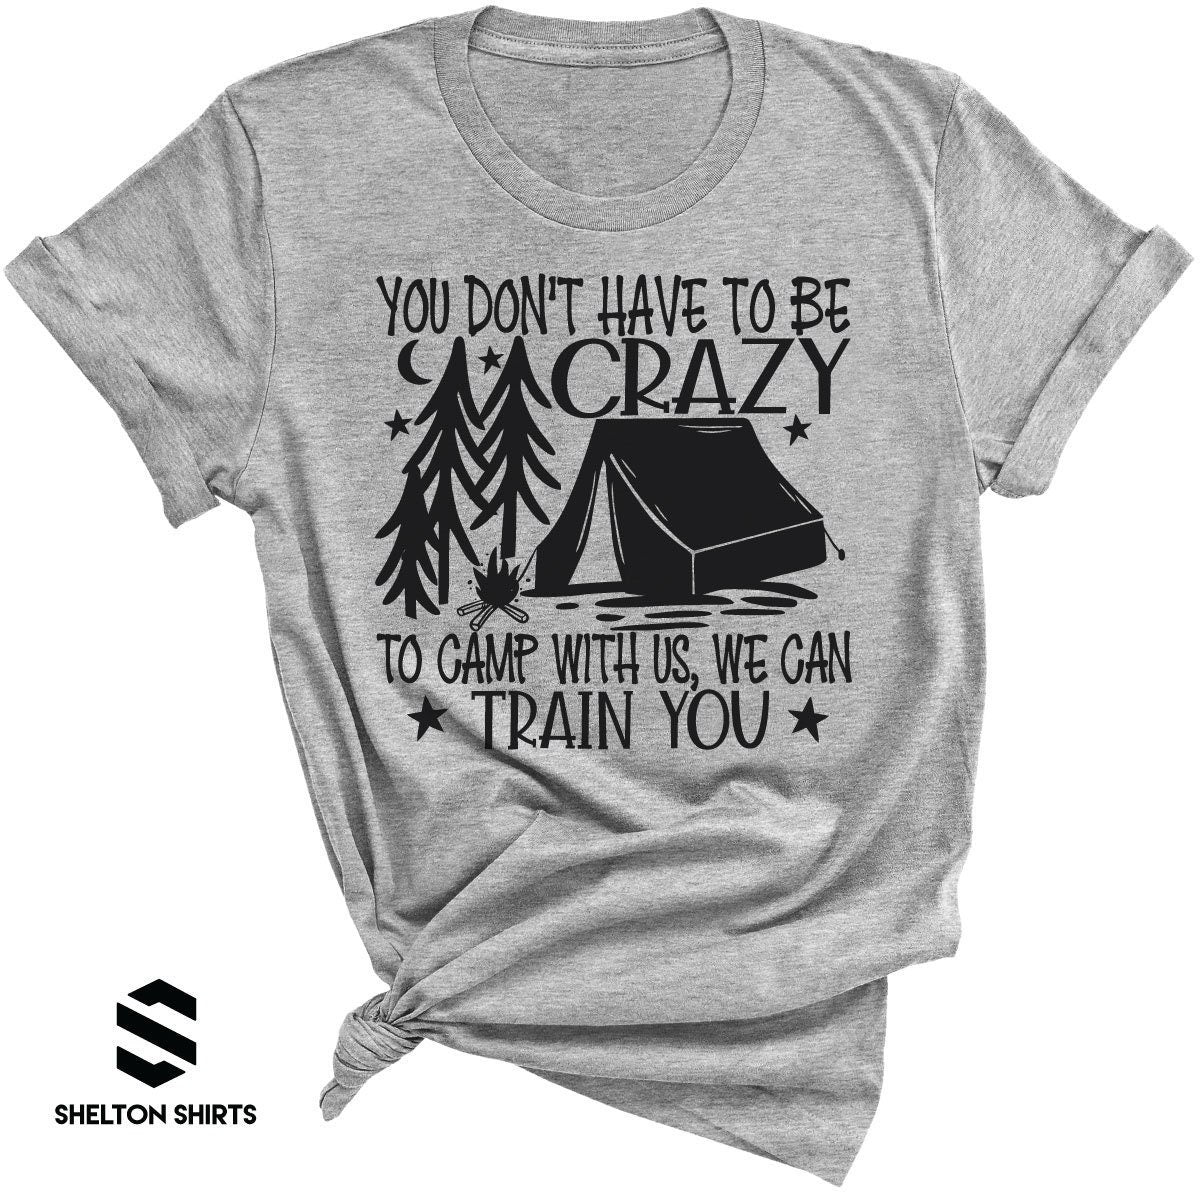 camp can to Funny You train you T-Sh us be – we SheltonShirts don\'t crazy have with to